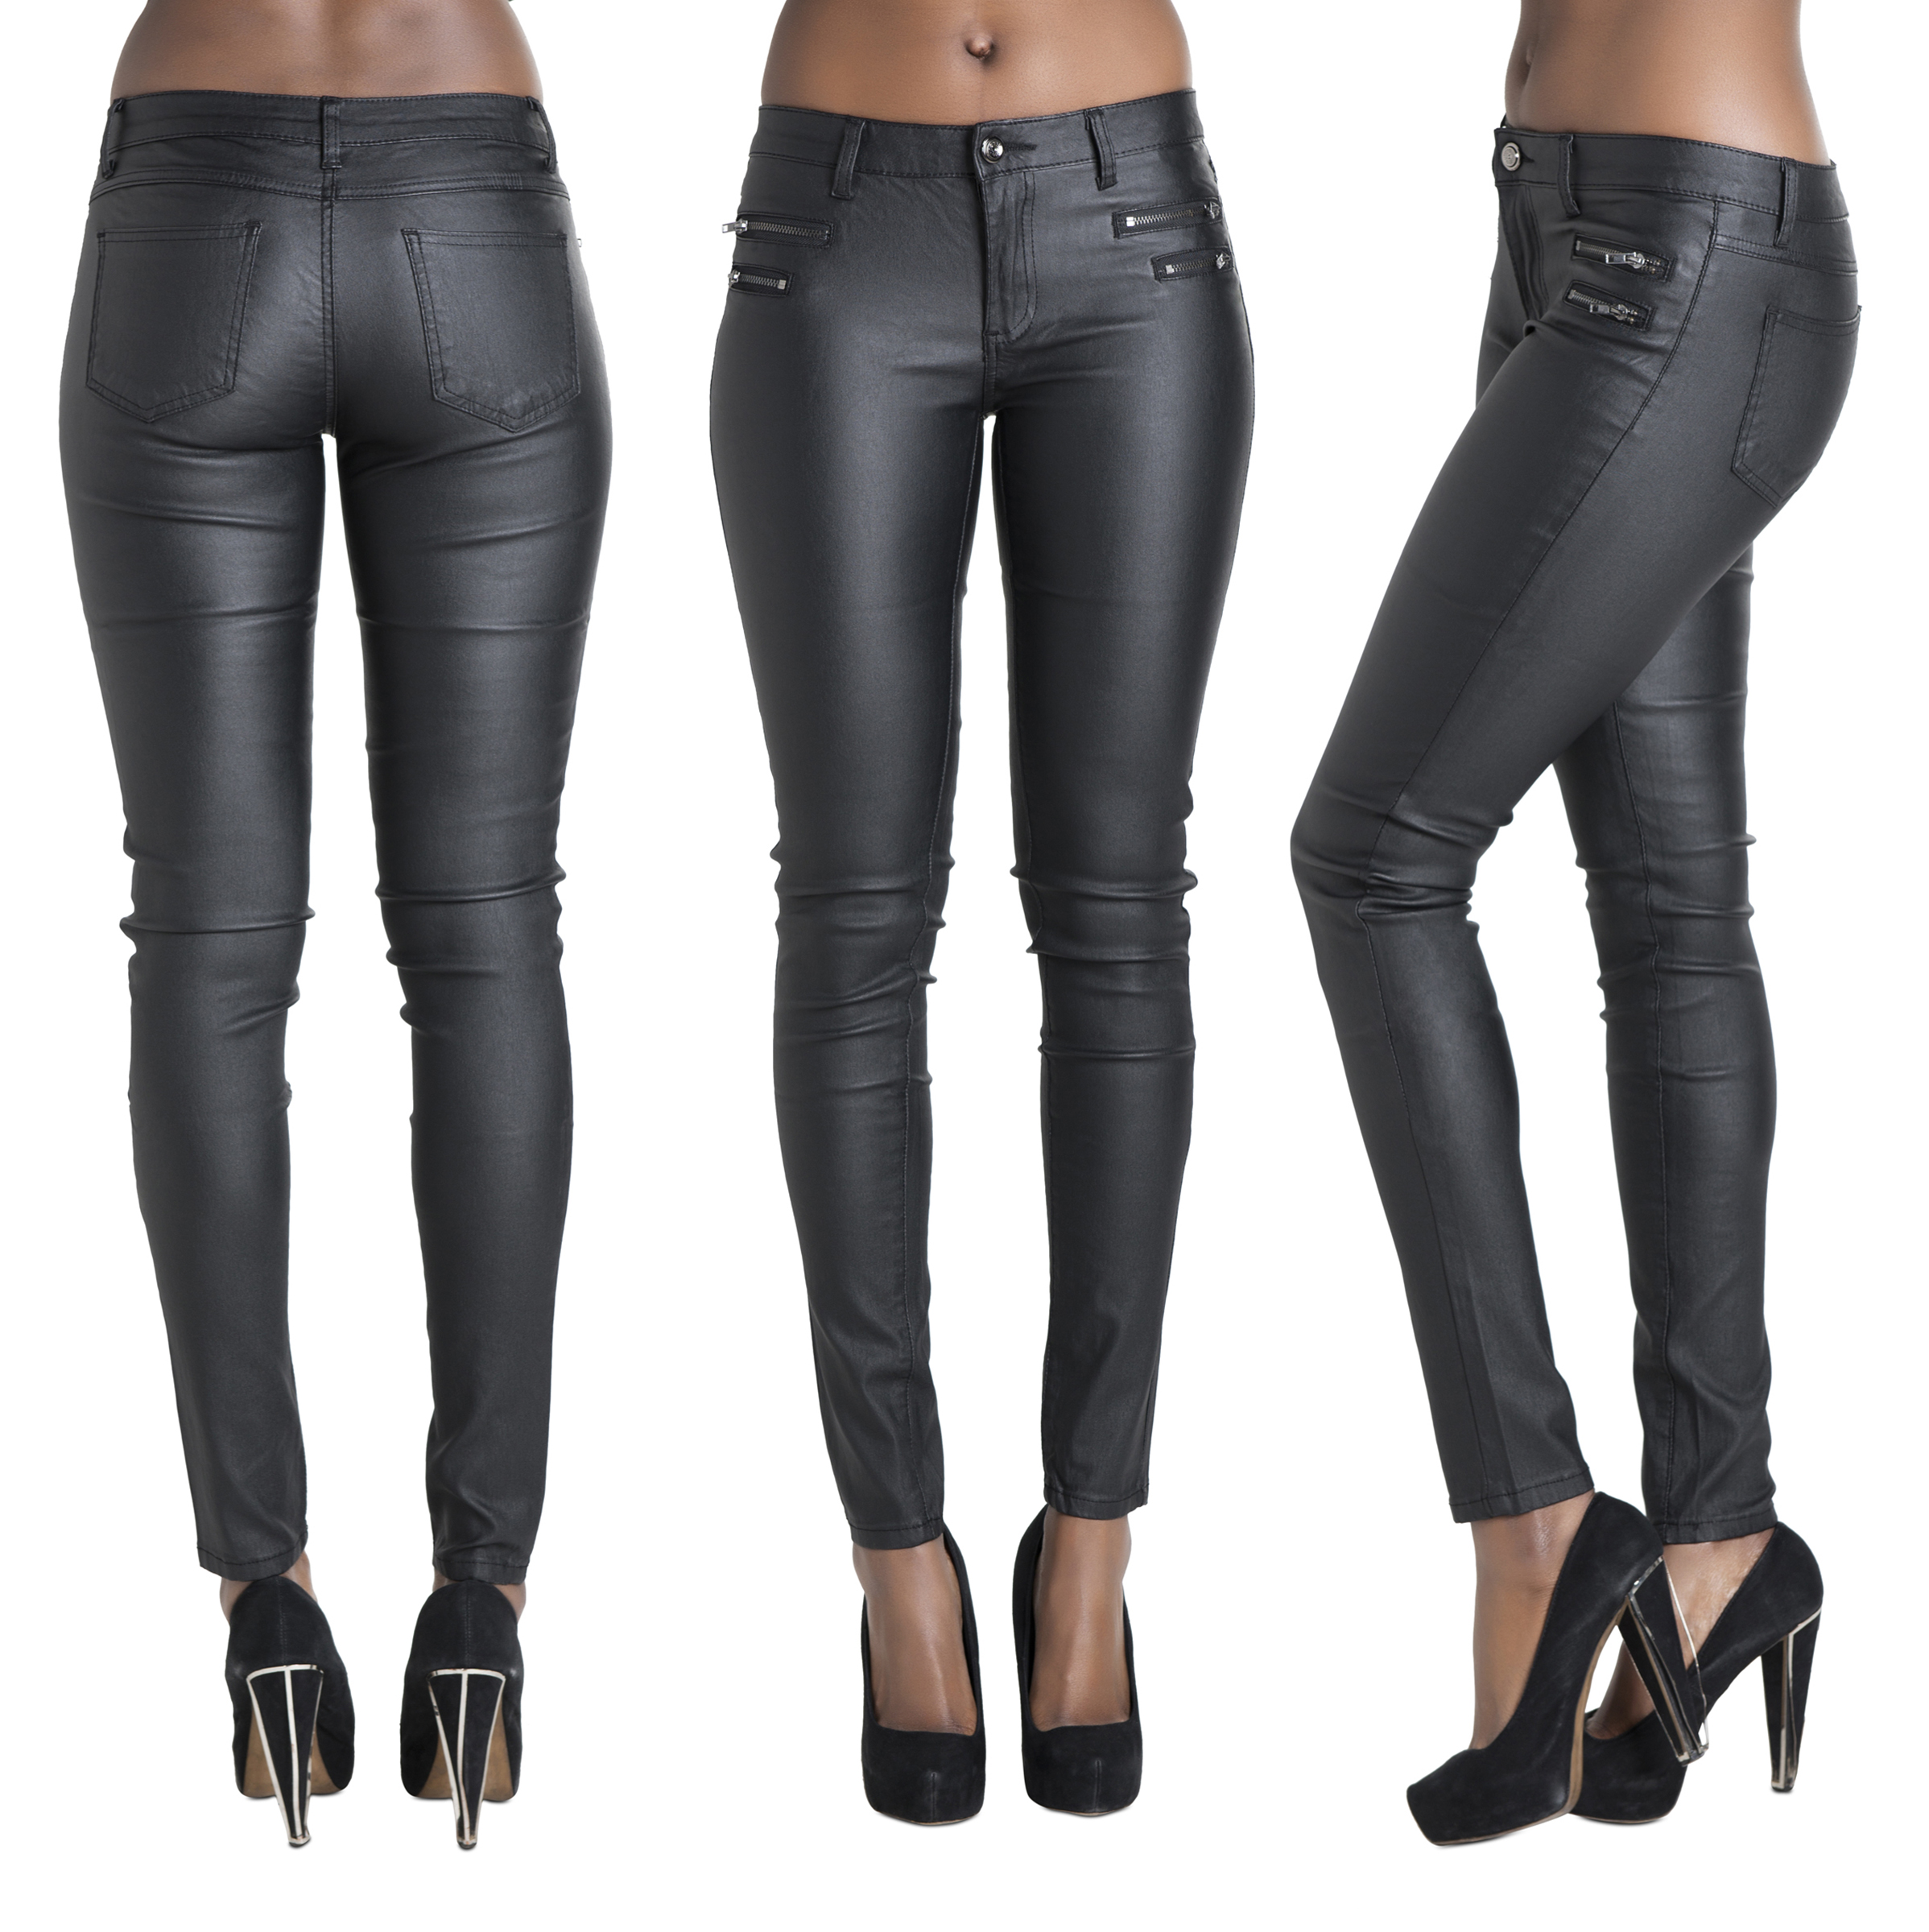 NEW WOMENS LEATHER LOOK JEANS SEXY TROUSERS LADIES BLACK SLIM FIT SIZE ...